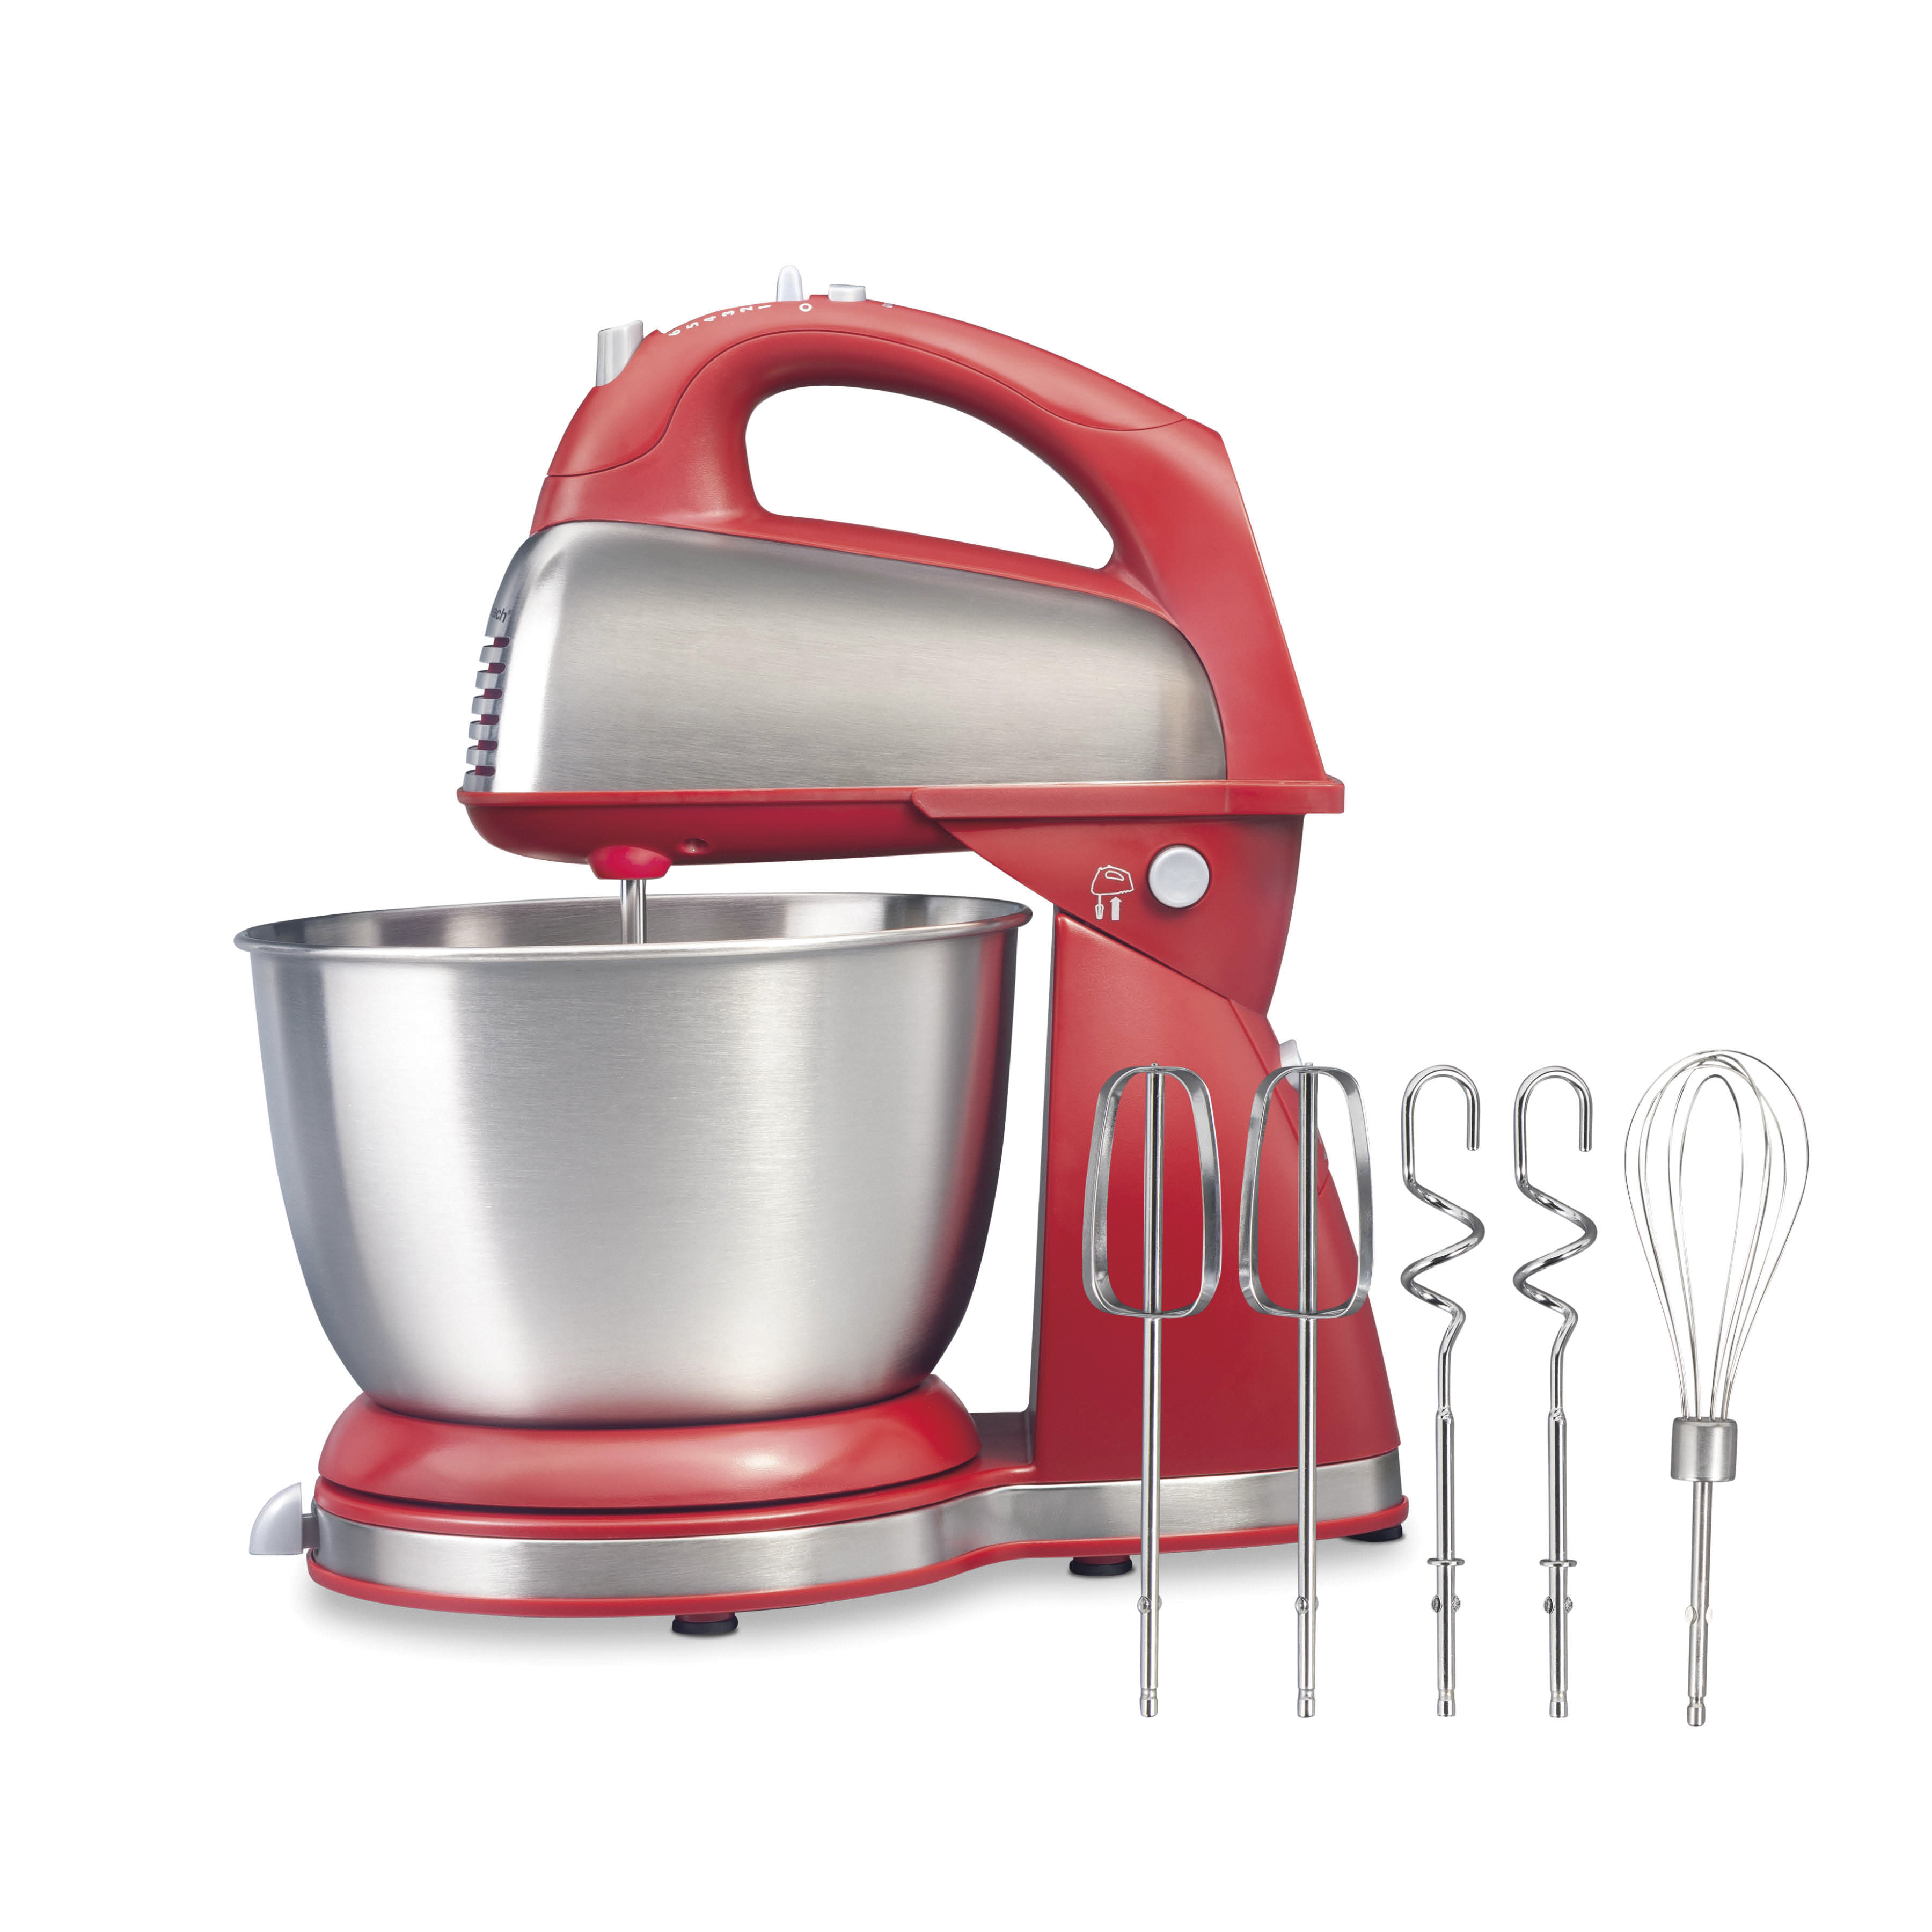 Hamilton Beach Classic Stand and Hand Mixer, 4 Quart Stainless Steel Bowl, 6 Speeds with Quick Burst, Red, 64654 - image 1 of 8